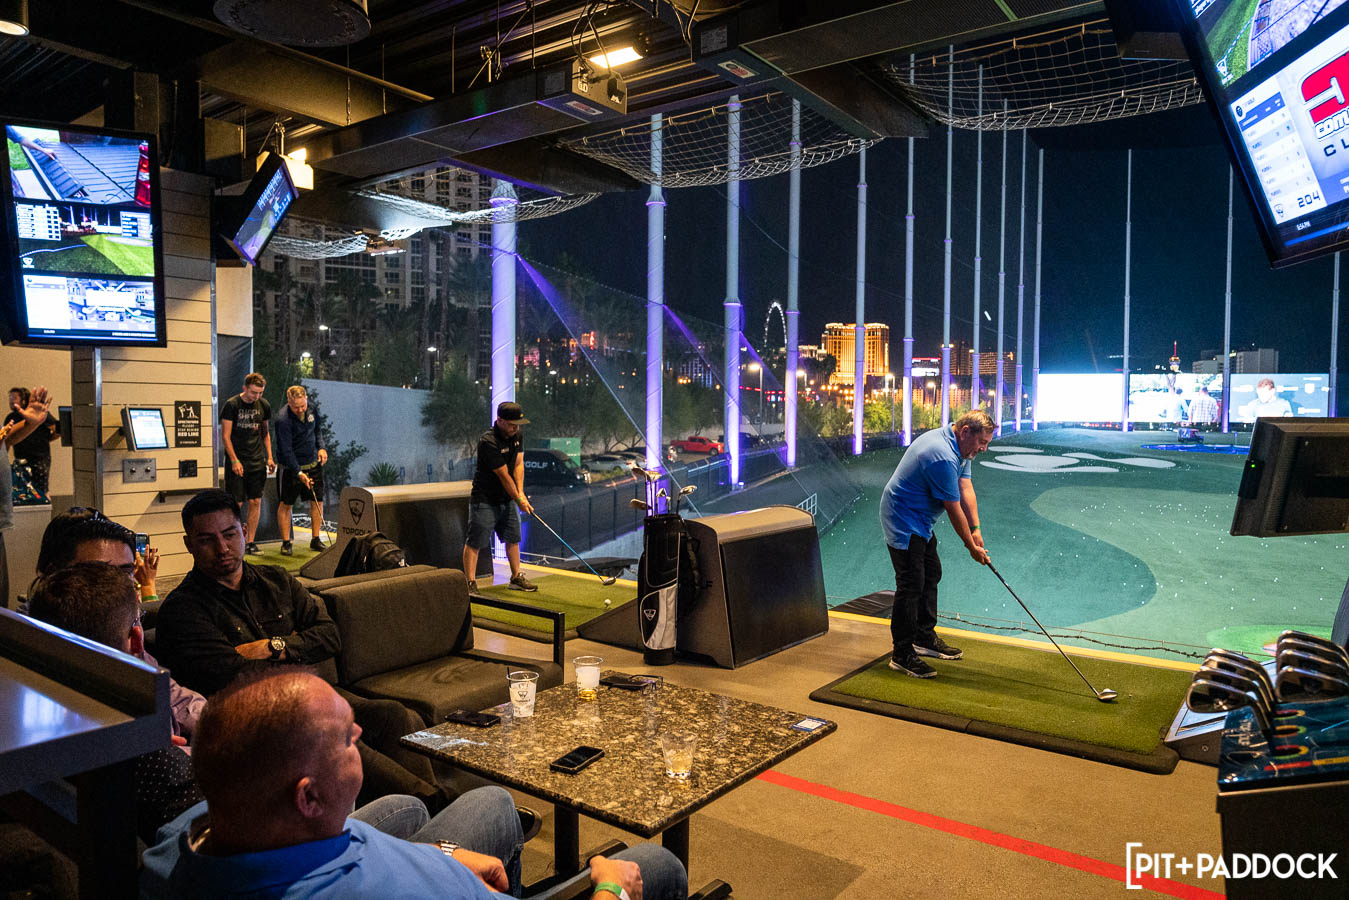 Celebrating SEMA with a Pit+Paddock Party at Topgolf Las Vegas